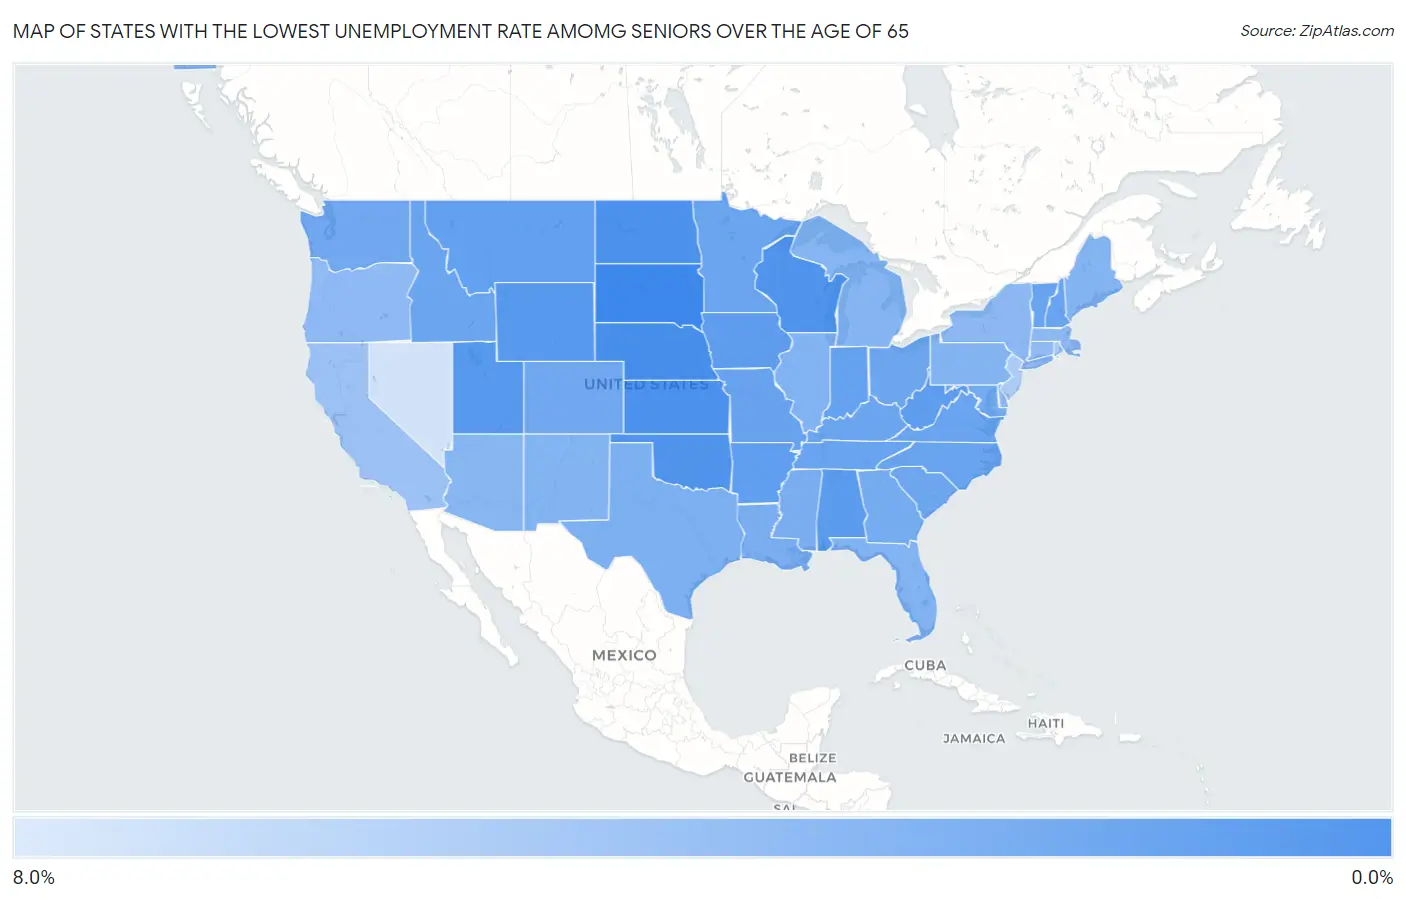 States with the Lowest Unemployment Rate Amomg Seniors Over the Age of 65 in the United States Map